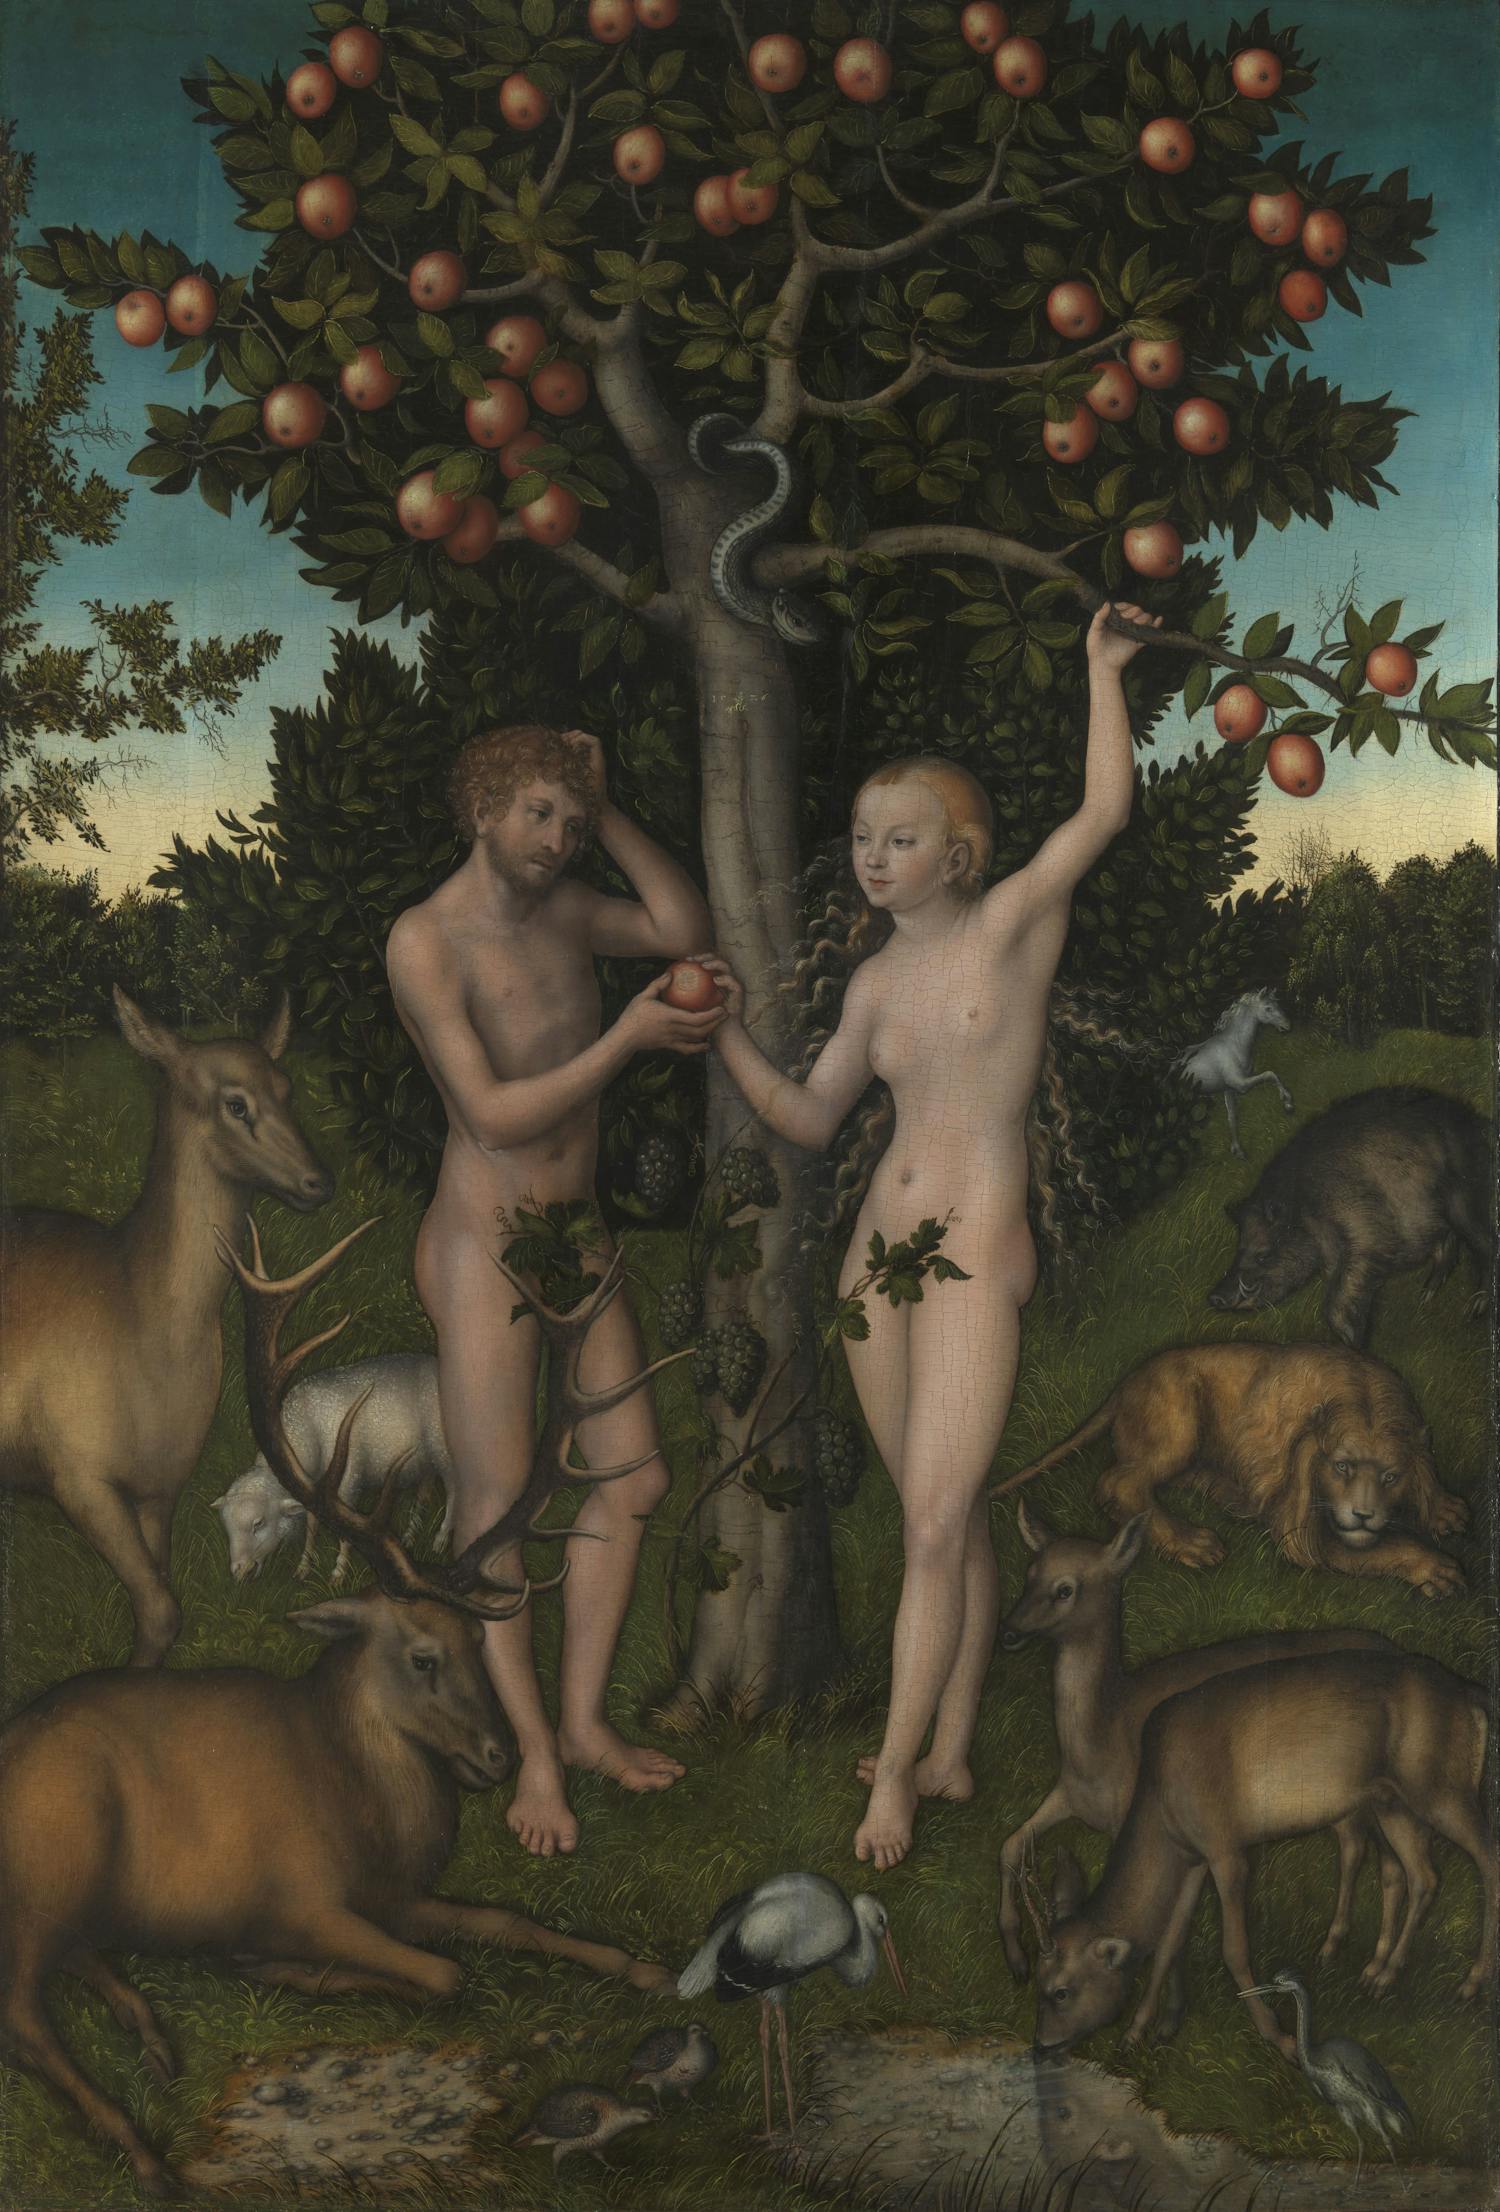 [ID: The work shows a man and a woman standing under an apple tree in the centre of the painting. They are surrounded by a group of deer, a sheep, a lion and a boar. A line of trees is shown in the horizon that is in the middle of the painting. End of ID]